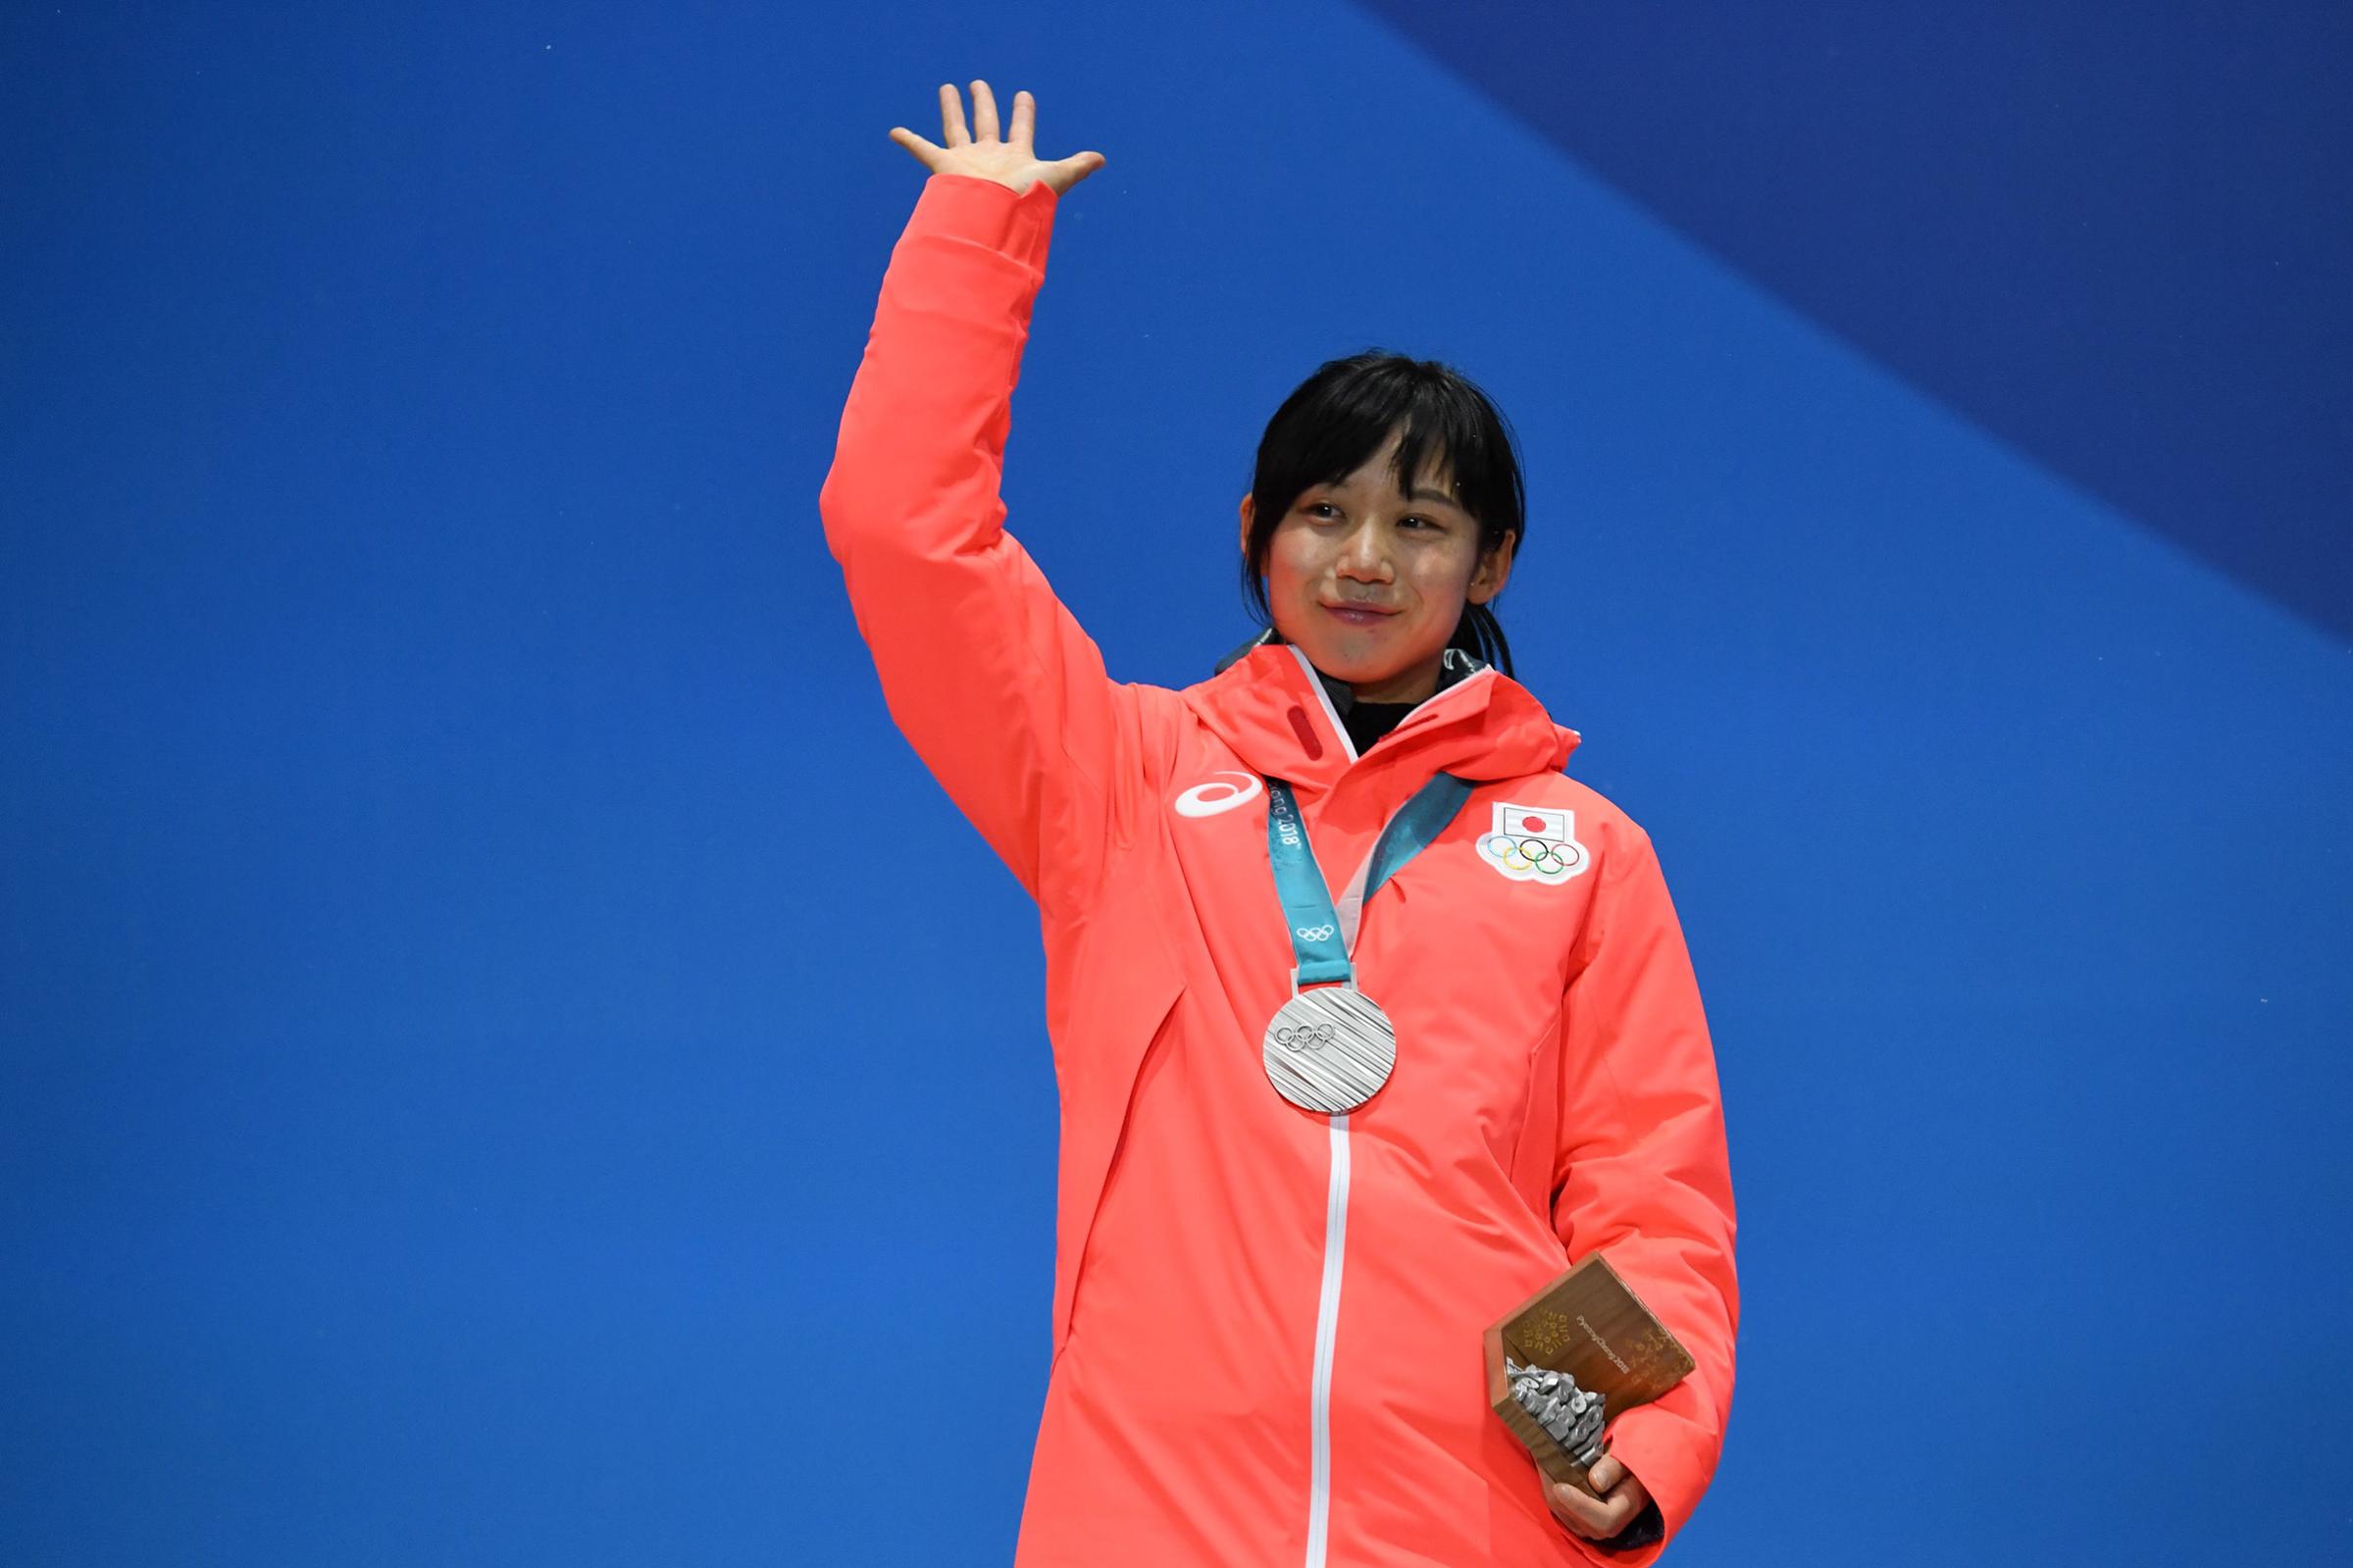 Japan's silver medallist Miho Takagi waves on the podium during the medal ceremony for the speed skating women's 1500m on Feb. 13, 2018.